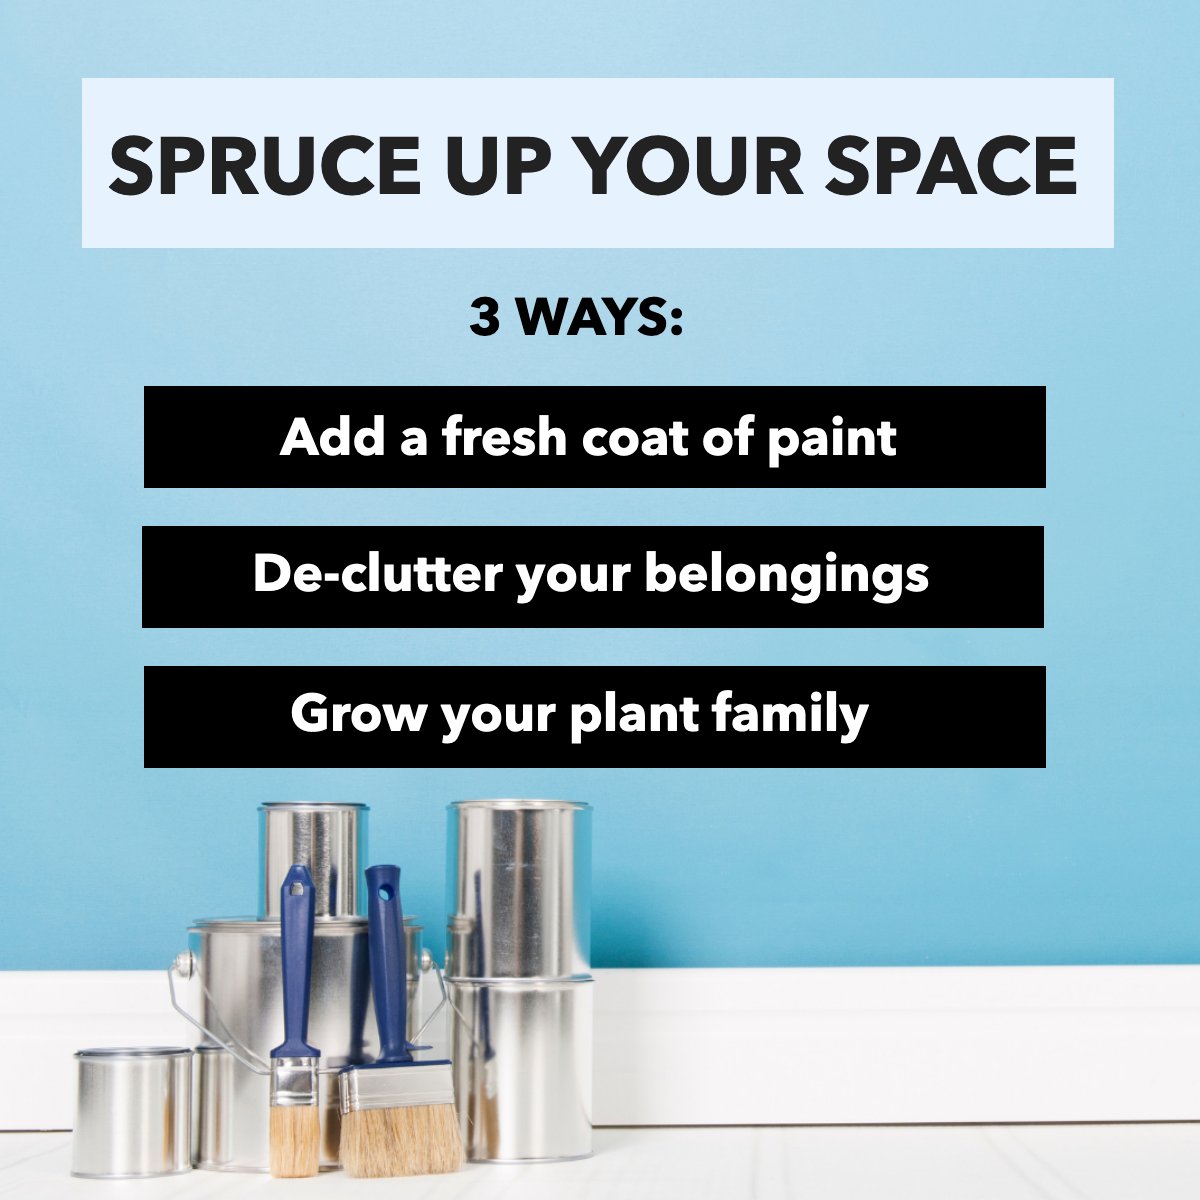 Find out 3 ways to give a fresh look to your spaces. #spruceupyourspace #spruceupyourhome #spruceuptheplace #freshpaint #PropertyGirl #eXpRealtor #CarrieThompsonTeam #ServeMethod #GeneseeCounty #RealEstate